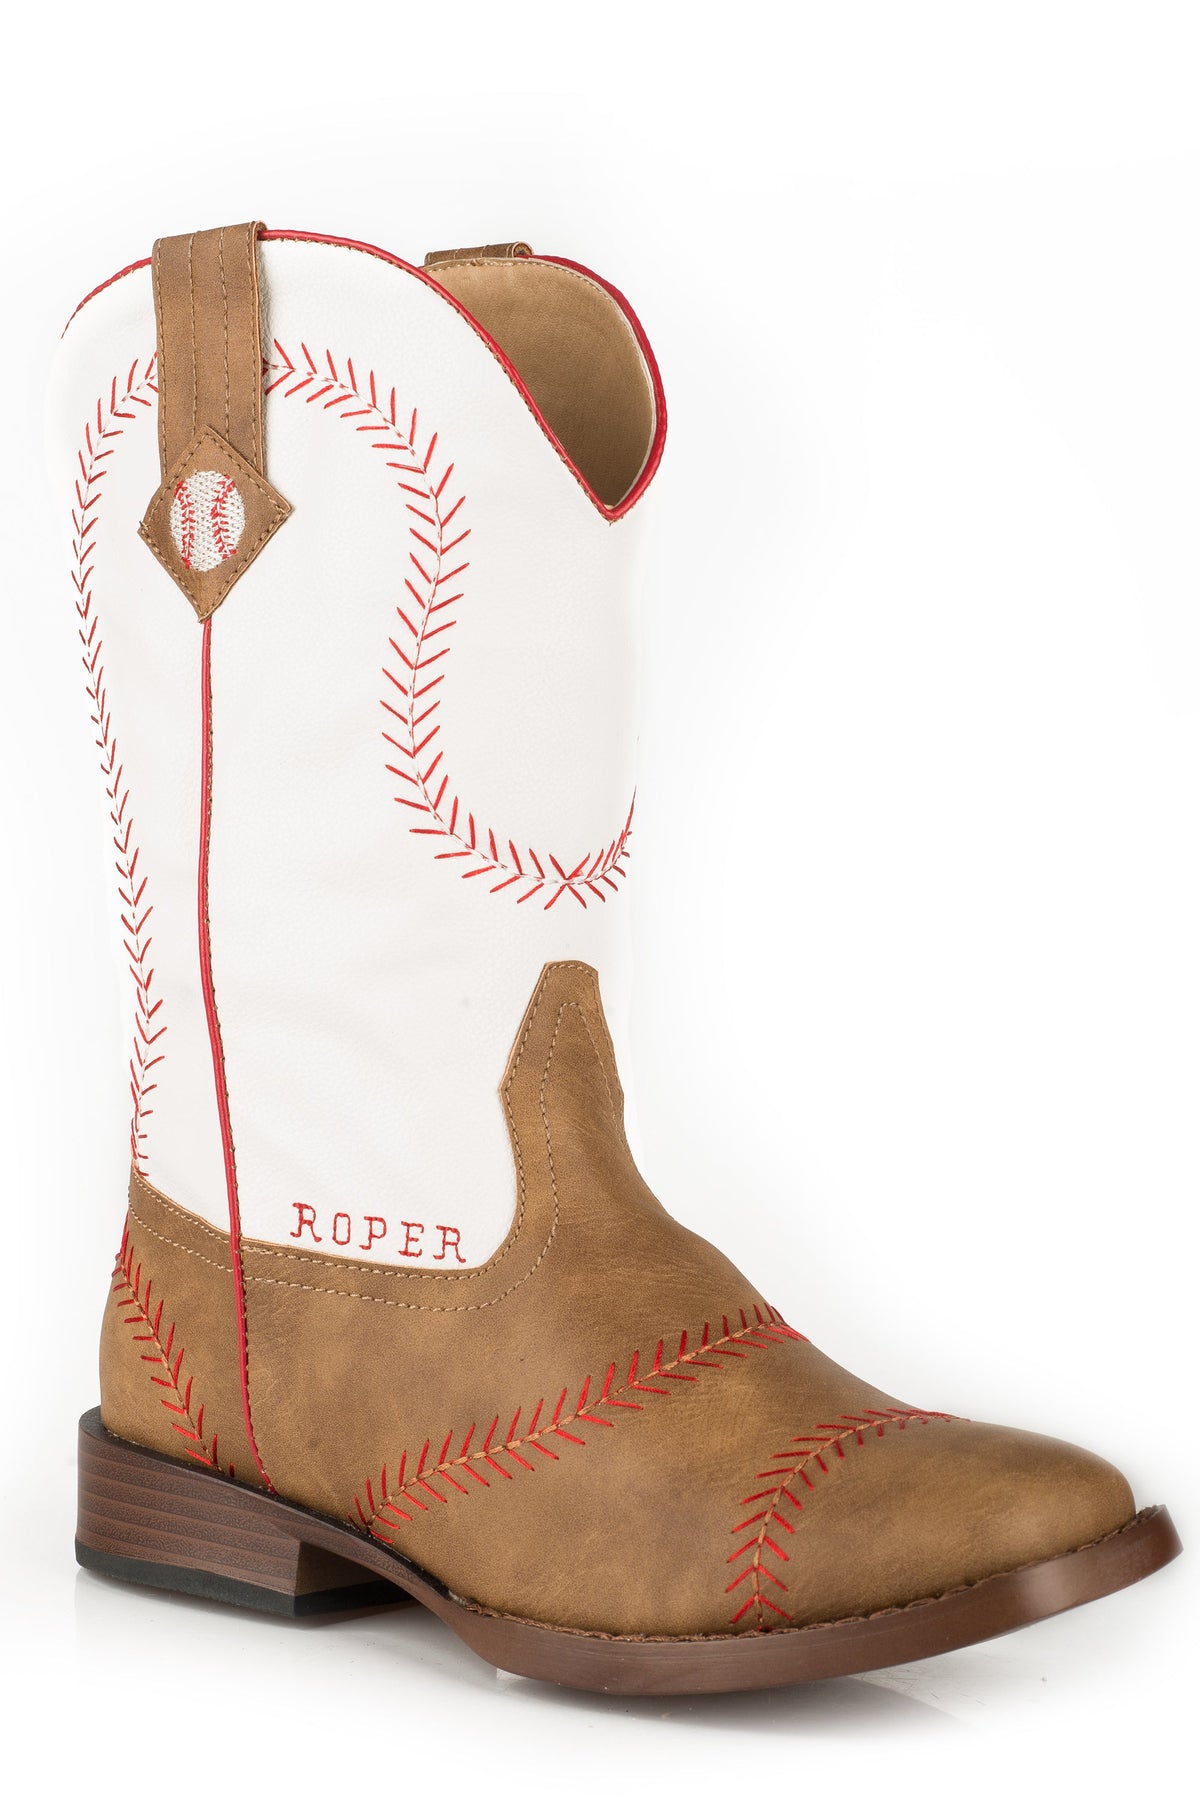 Roper Little Boys Tan And With Baseball Embroidery